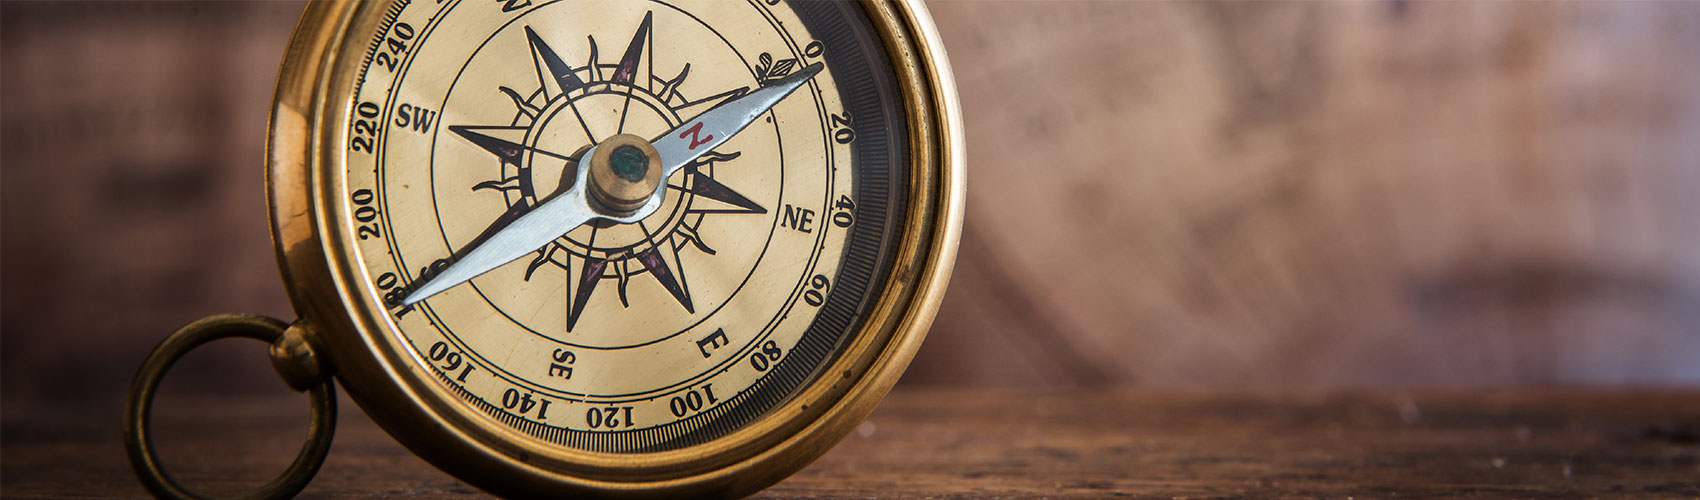 A round, gold compass resting on a wooden tabletop